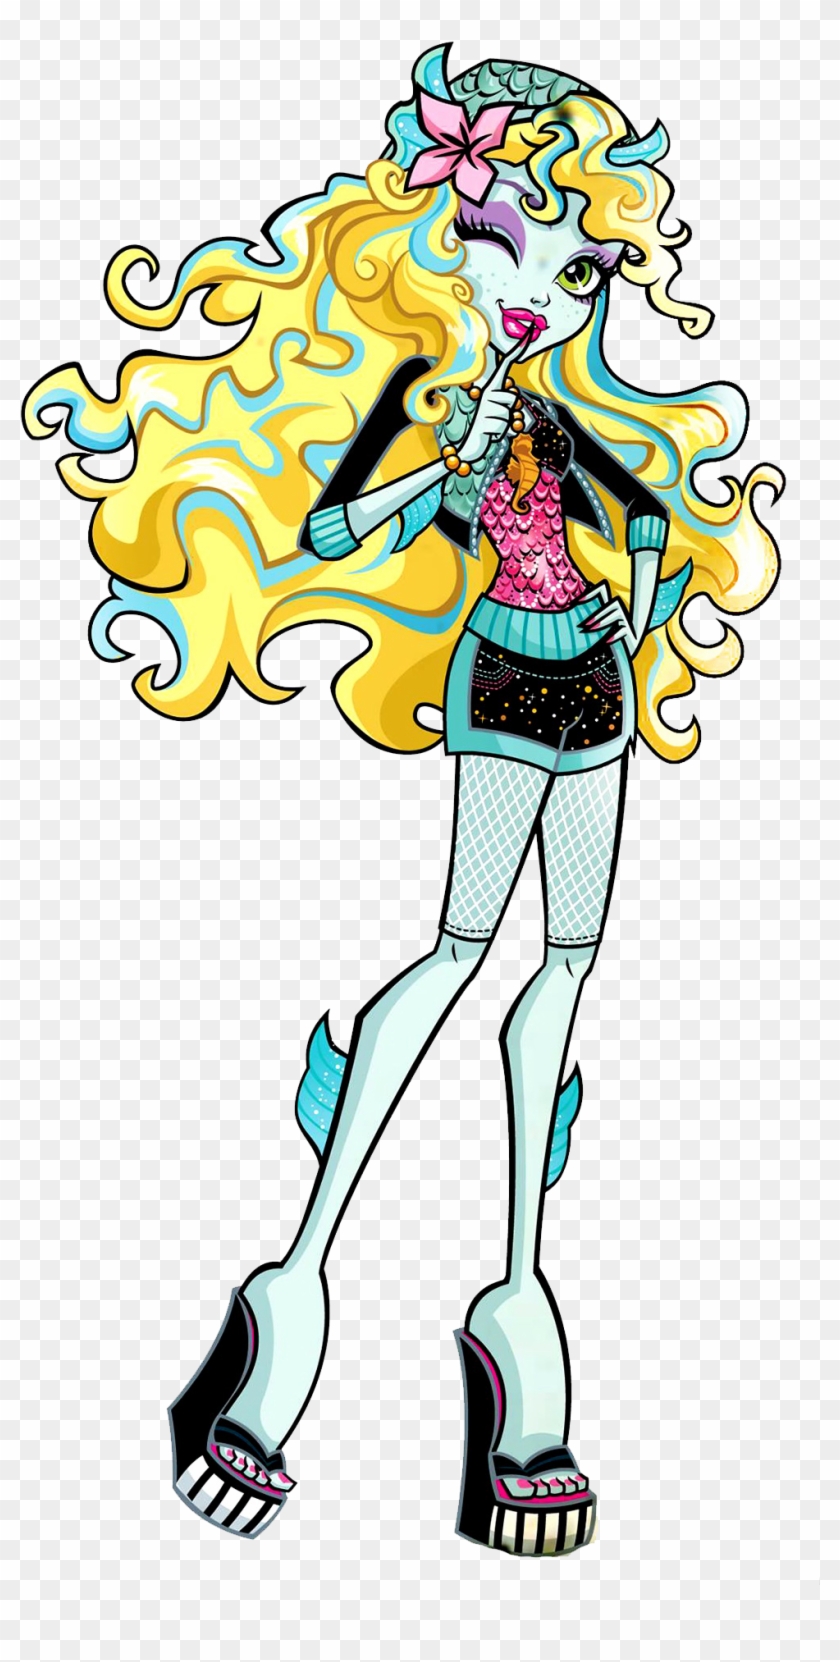 Lagoona Blue Lagoona Blue Is The Daughter Of A Sea - Monster High Lagoona Blue #448280